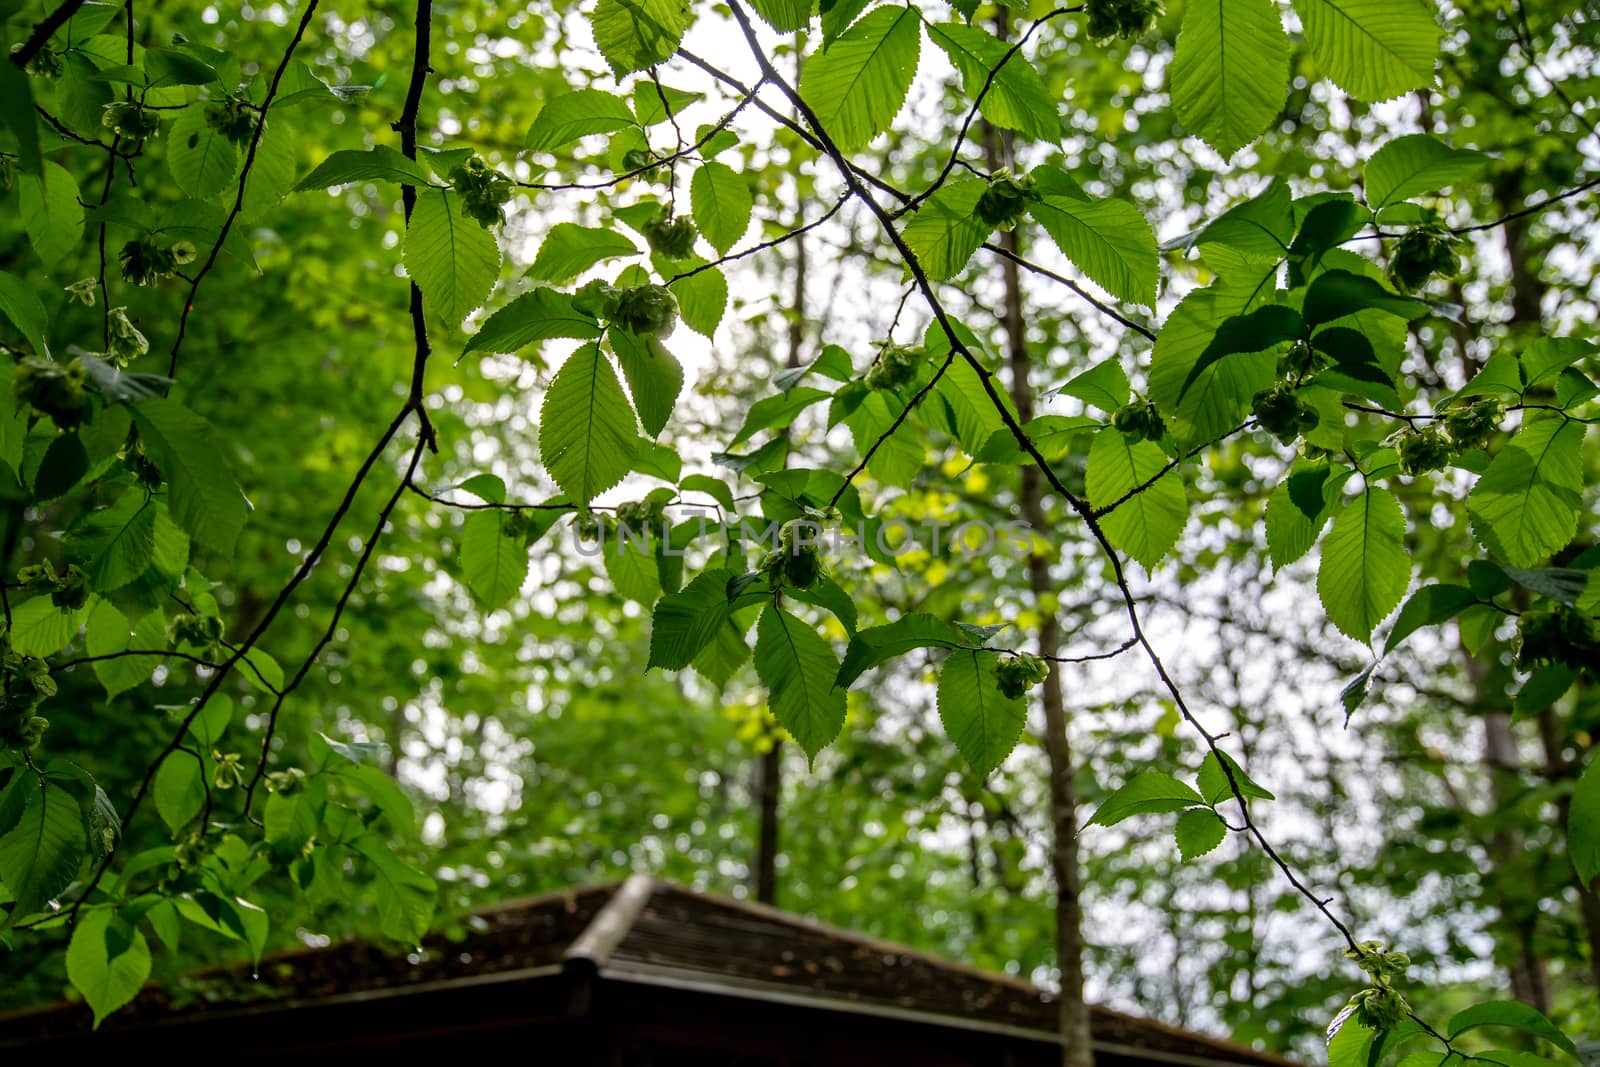 Fresh green hazelnuts are growing on the tree in forest. Green leaves on hazelnut trees in Latvia.